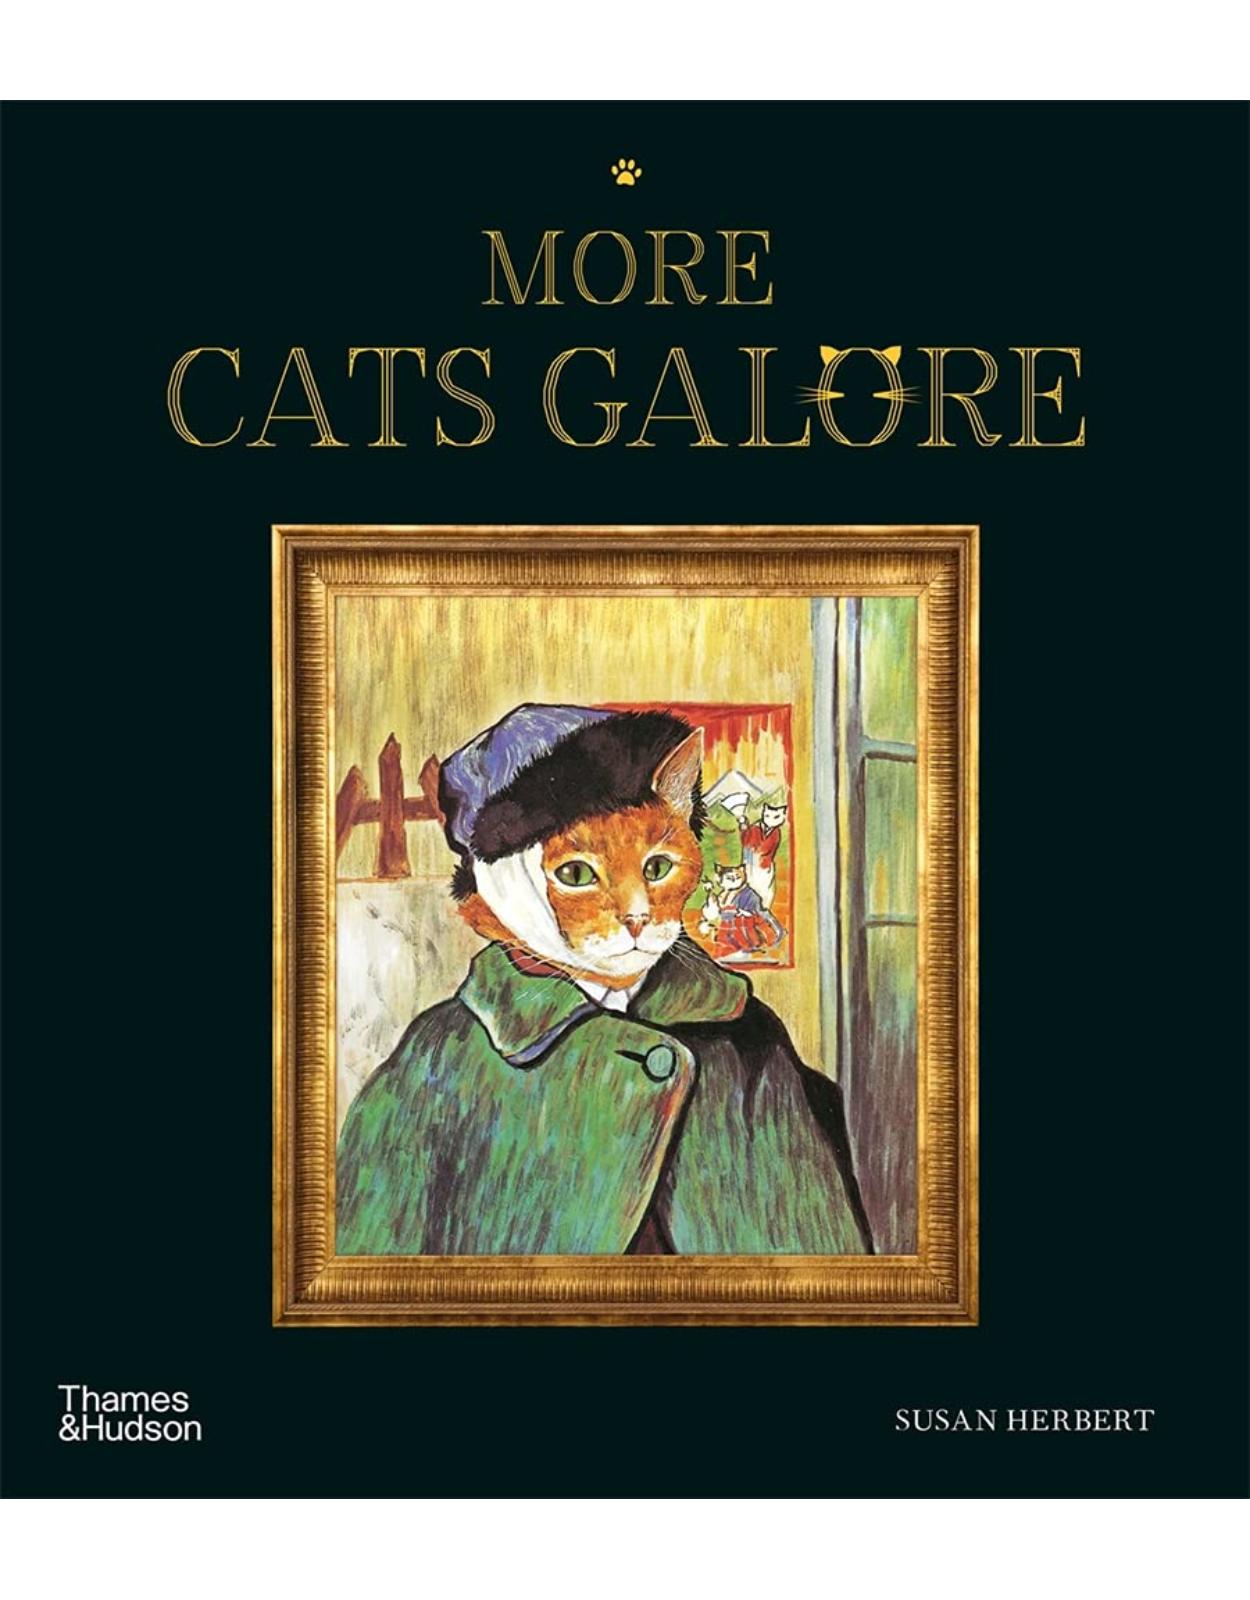 More Cats Galore: A Second Compendium of Cultured Cats